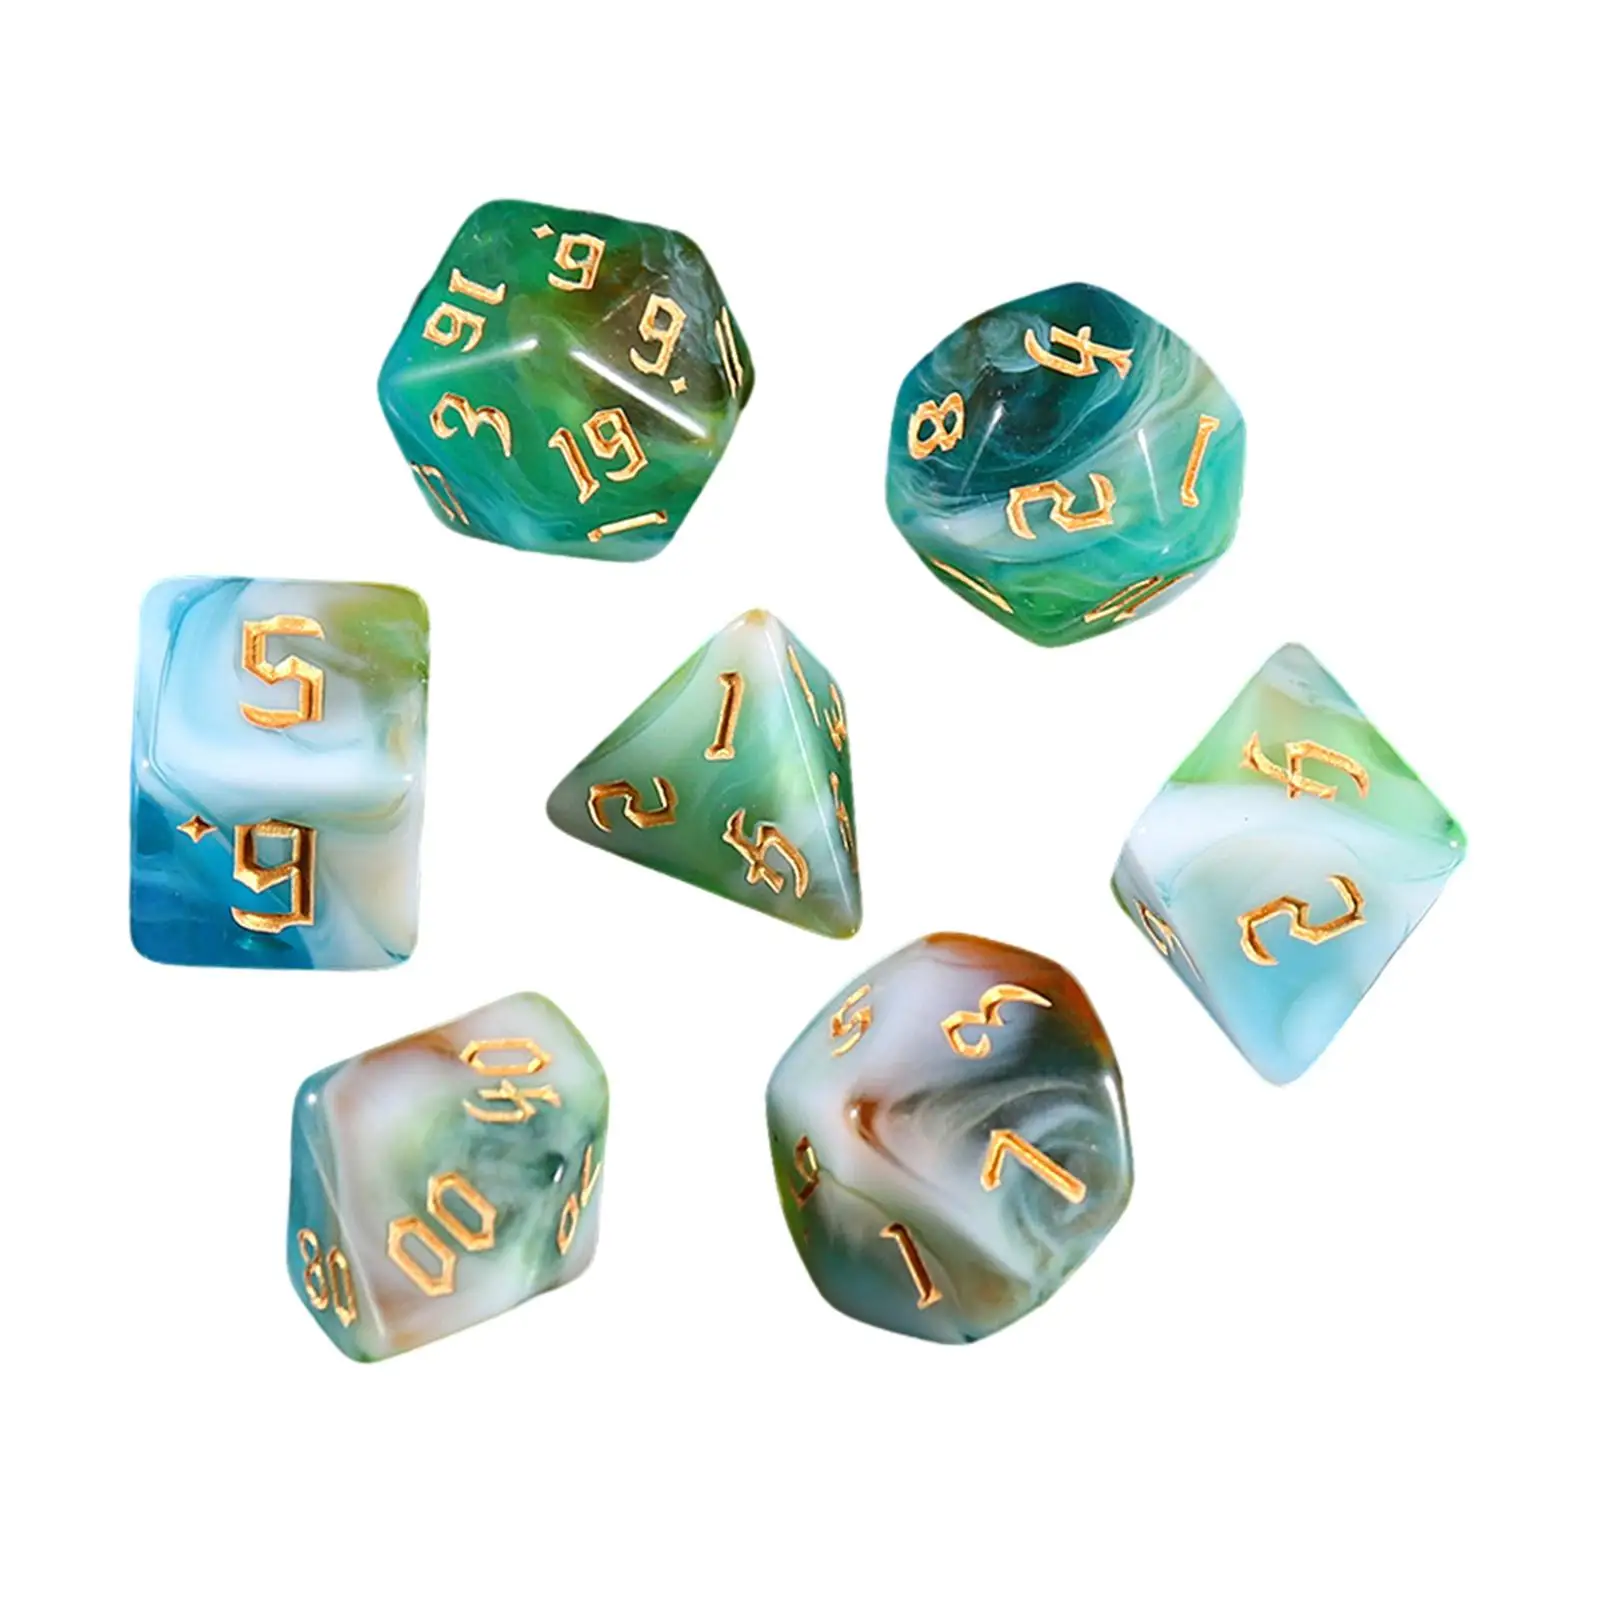 7x Multi Sided Dices Table Games Party Toys Acrylic Dices D4 D8 D10 D12 D20 Dices for RPG Role Playing Teaching Card Games